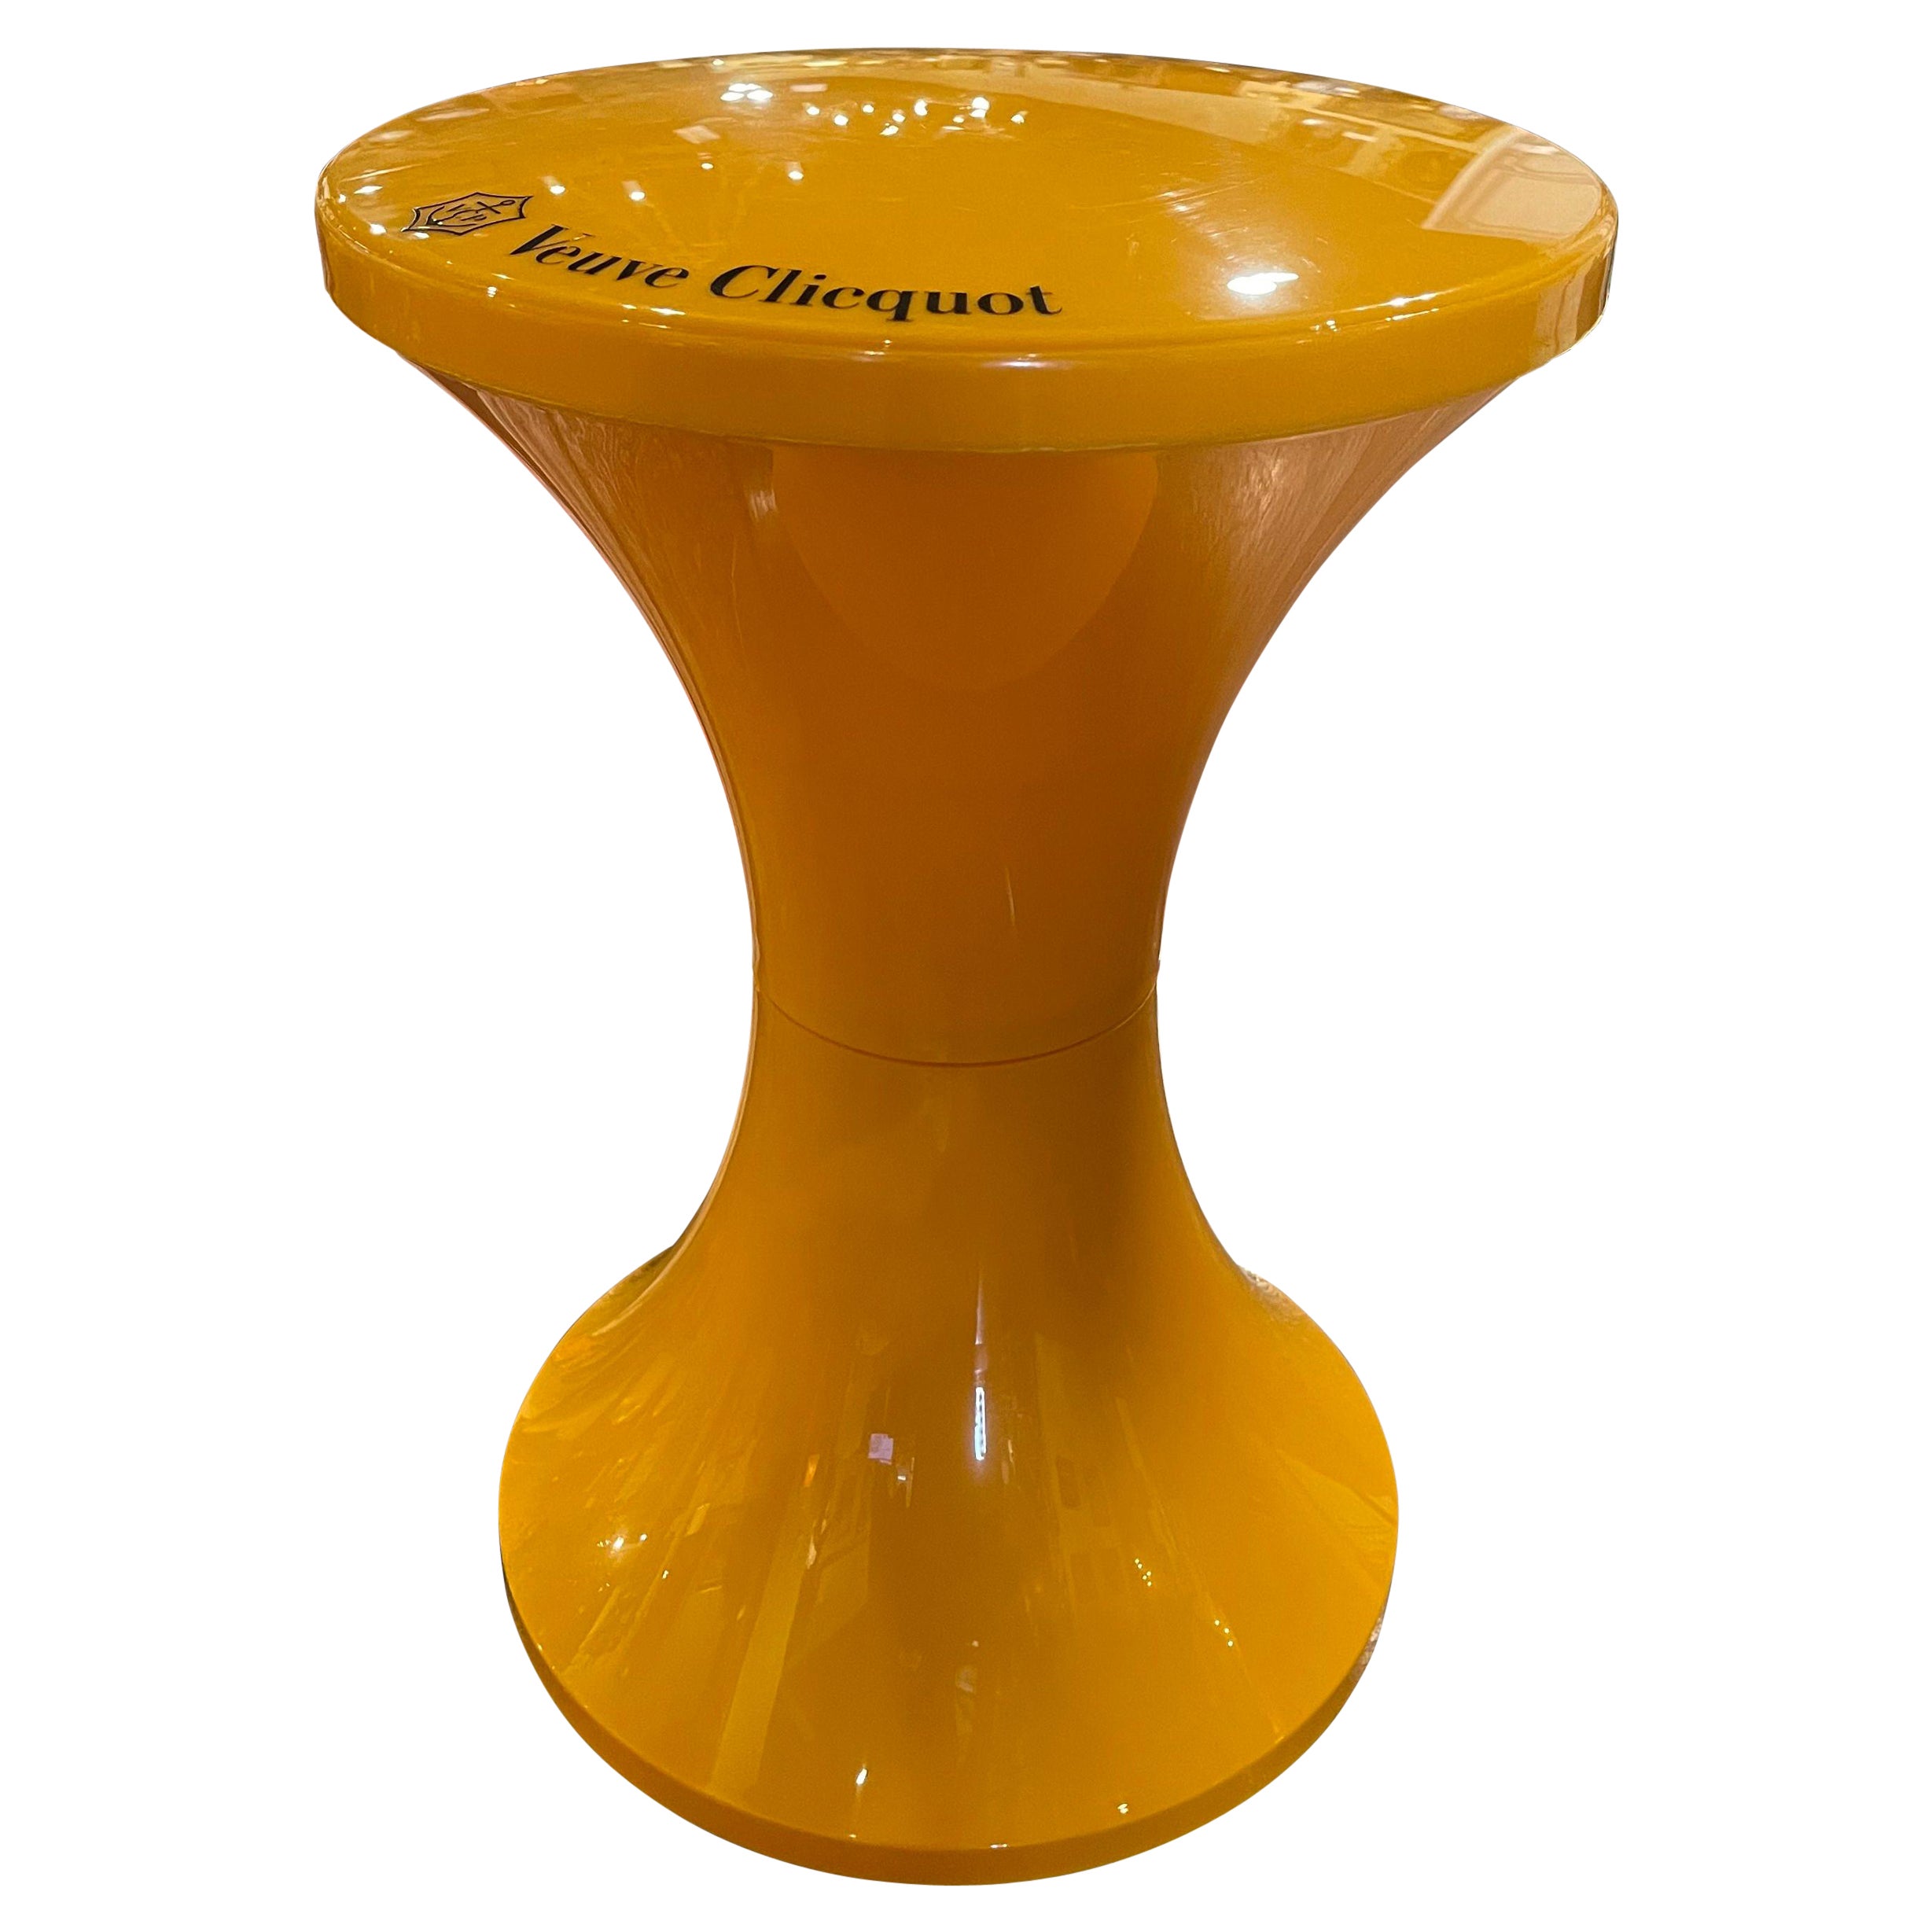 Vintage French "Veuve Clicquot" Champagne Cooler Tam Tam Stool For Sale